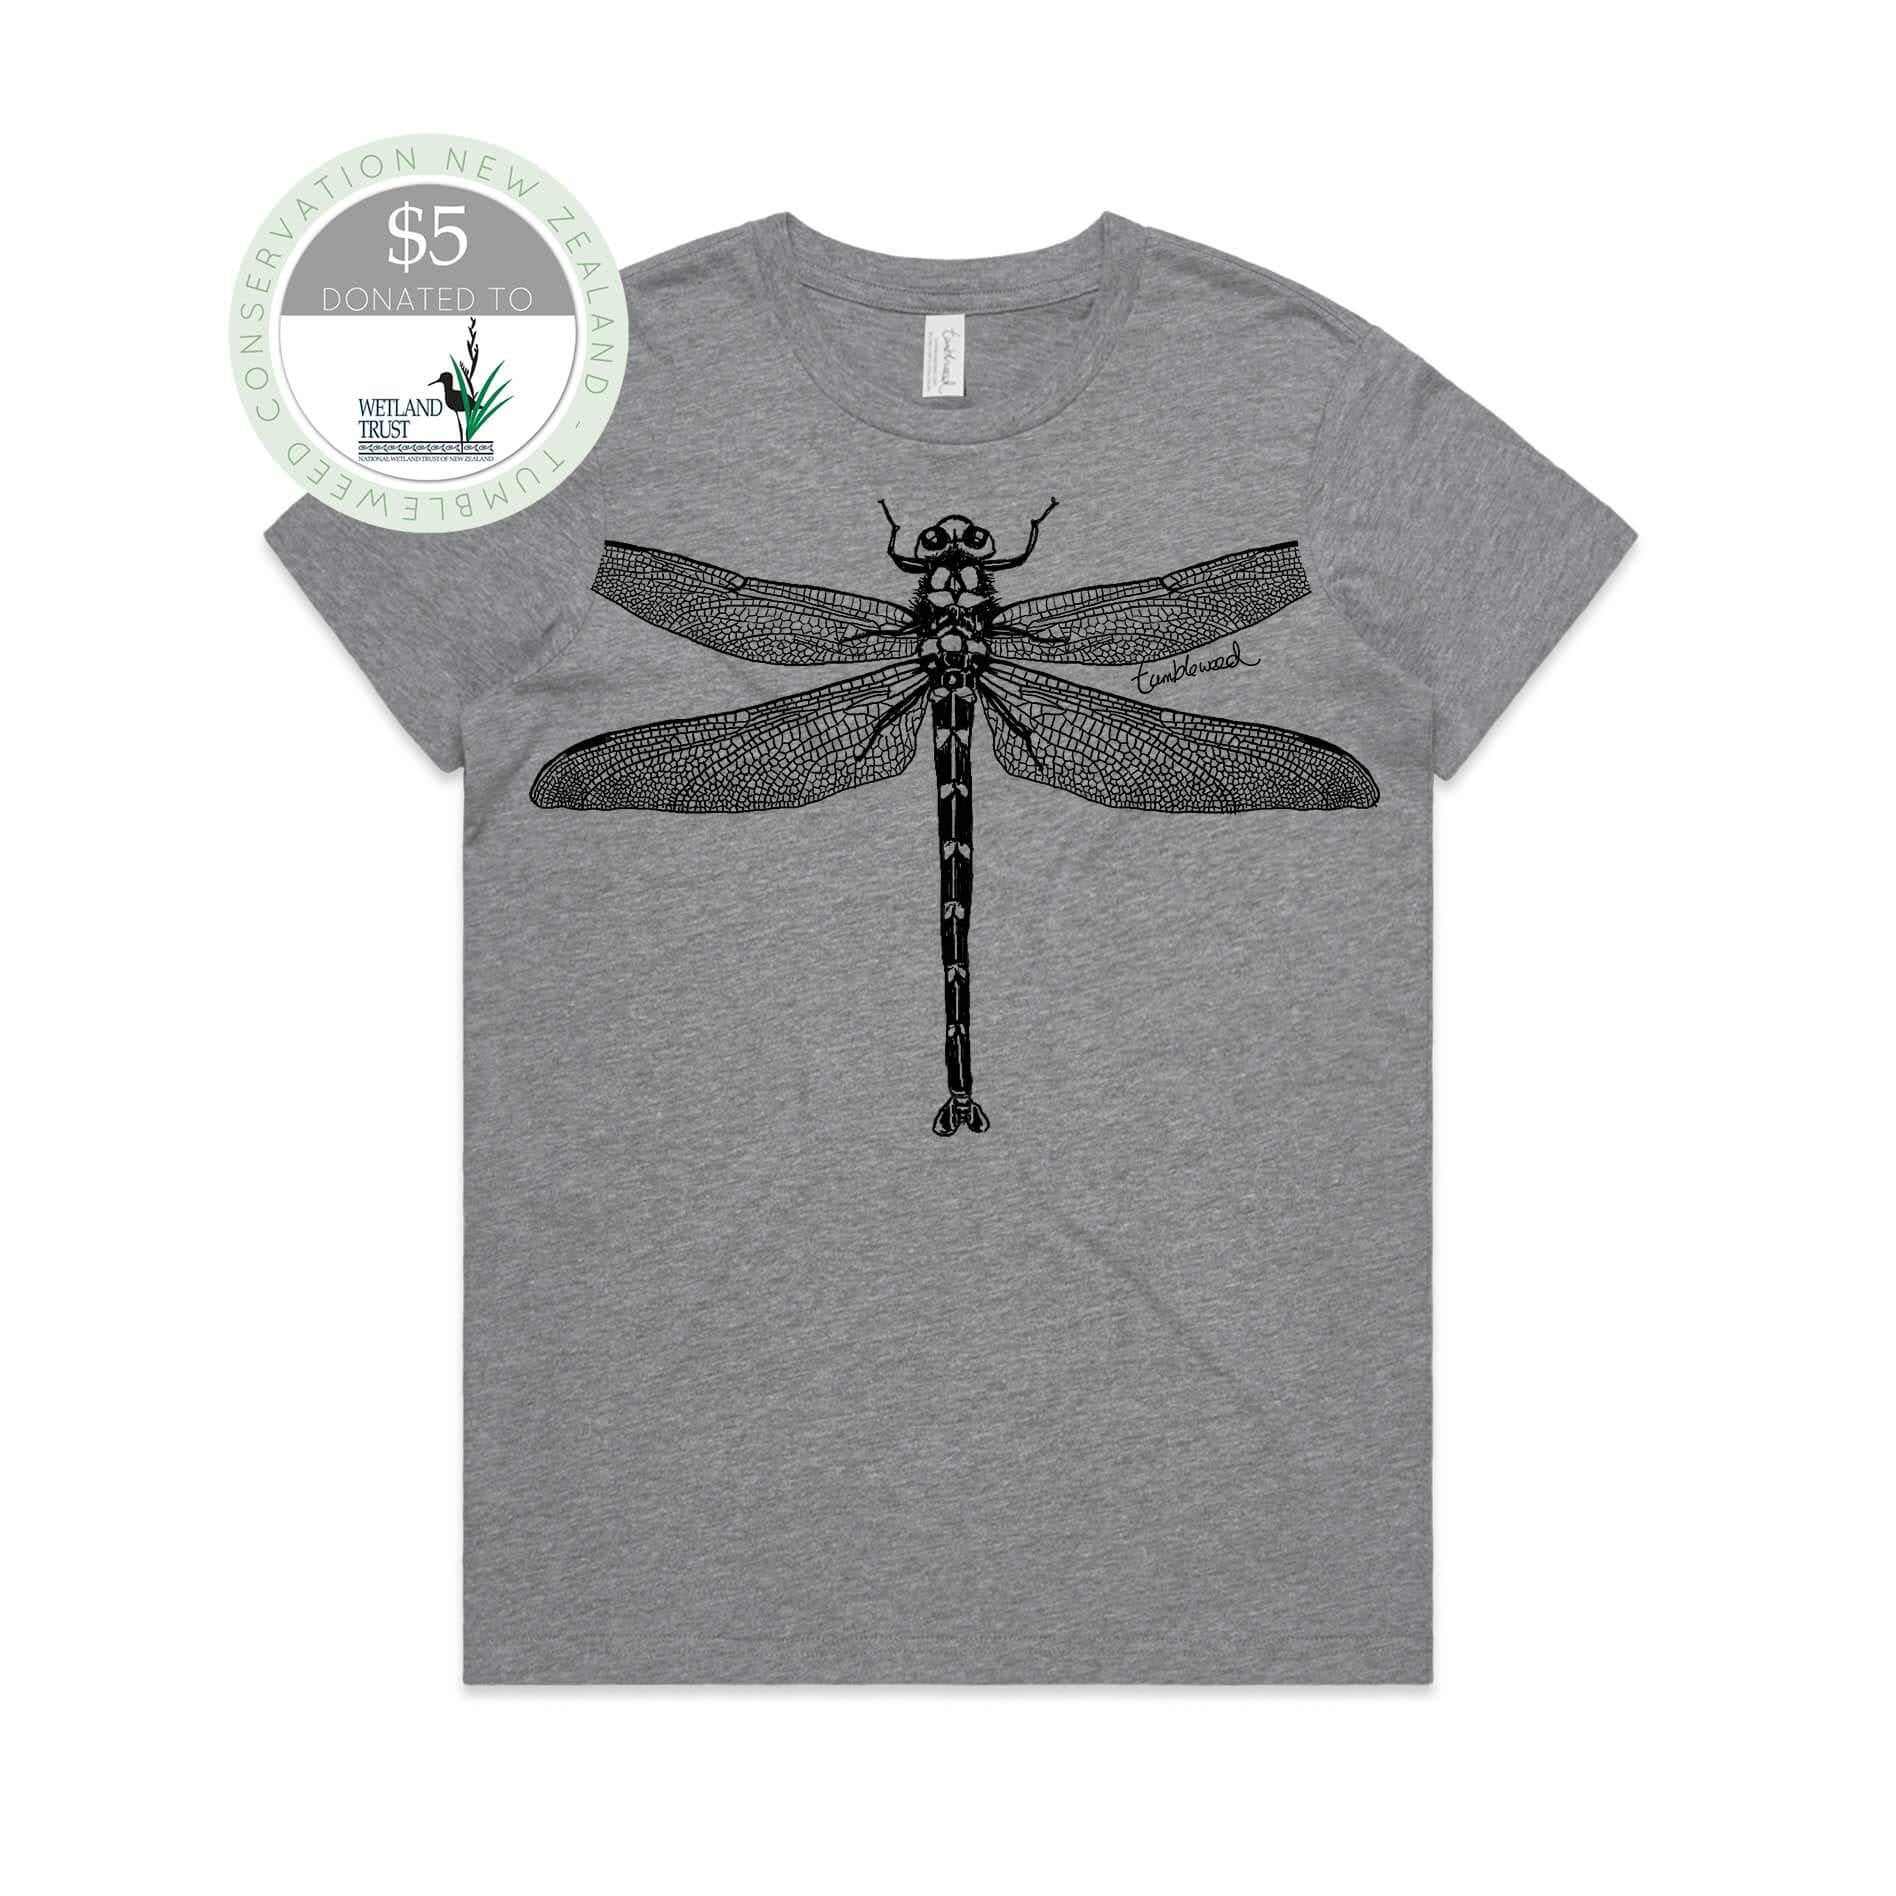 Grey marle, female t-shirt featuring a screen printed nz dragonfly design.